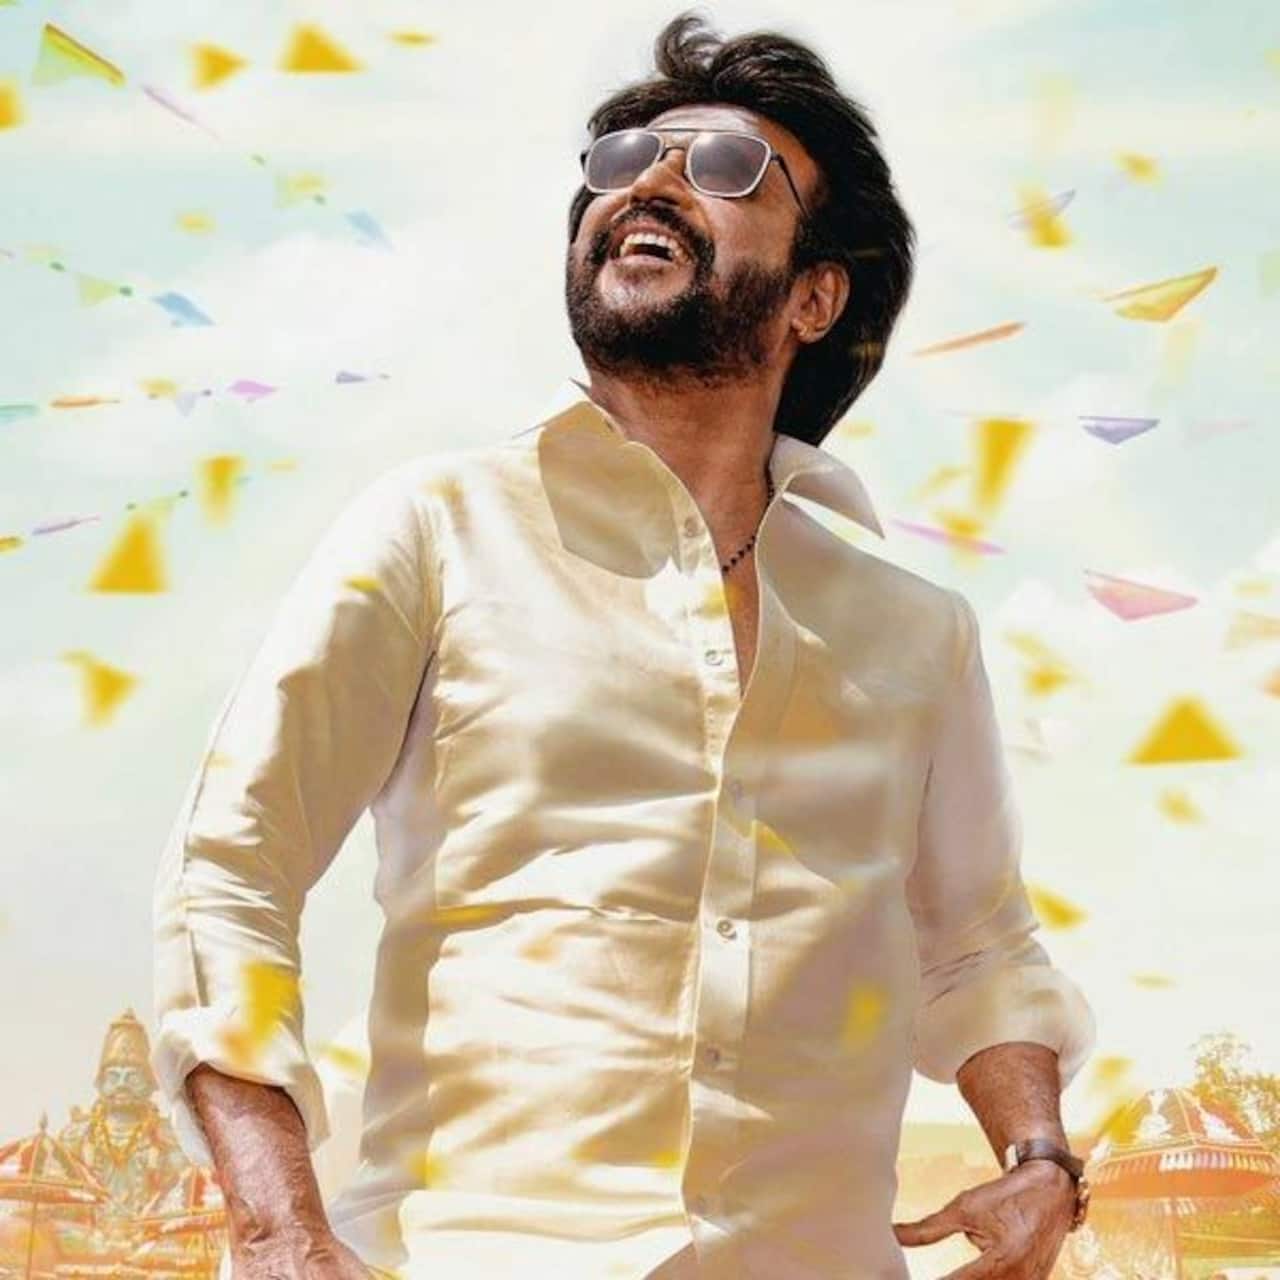 After Enthiran, Kabali, 2.0, Petta and Darbar, Annaatthe becomes Rajinikanth's sixth film to achieve THIS milestone at the global box office